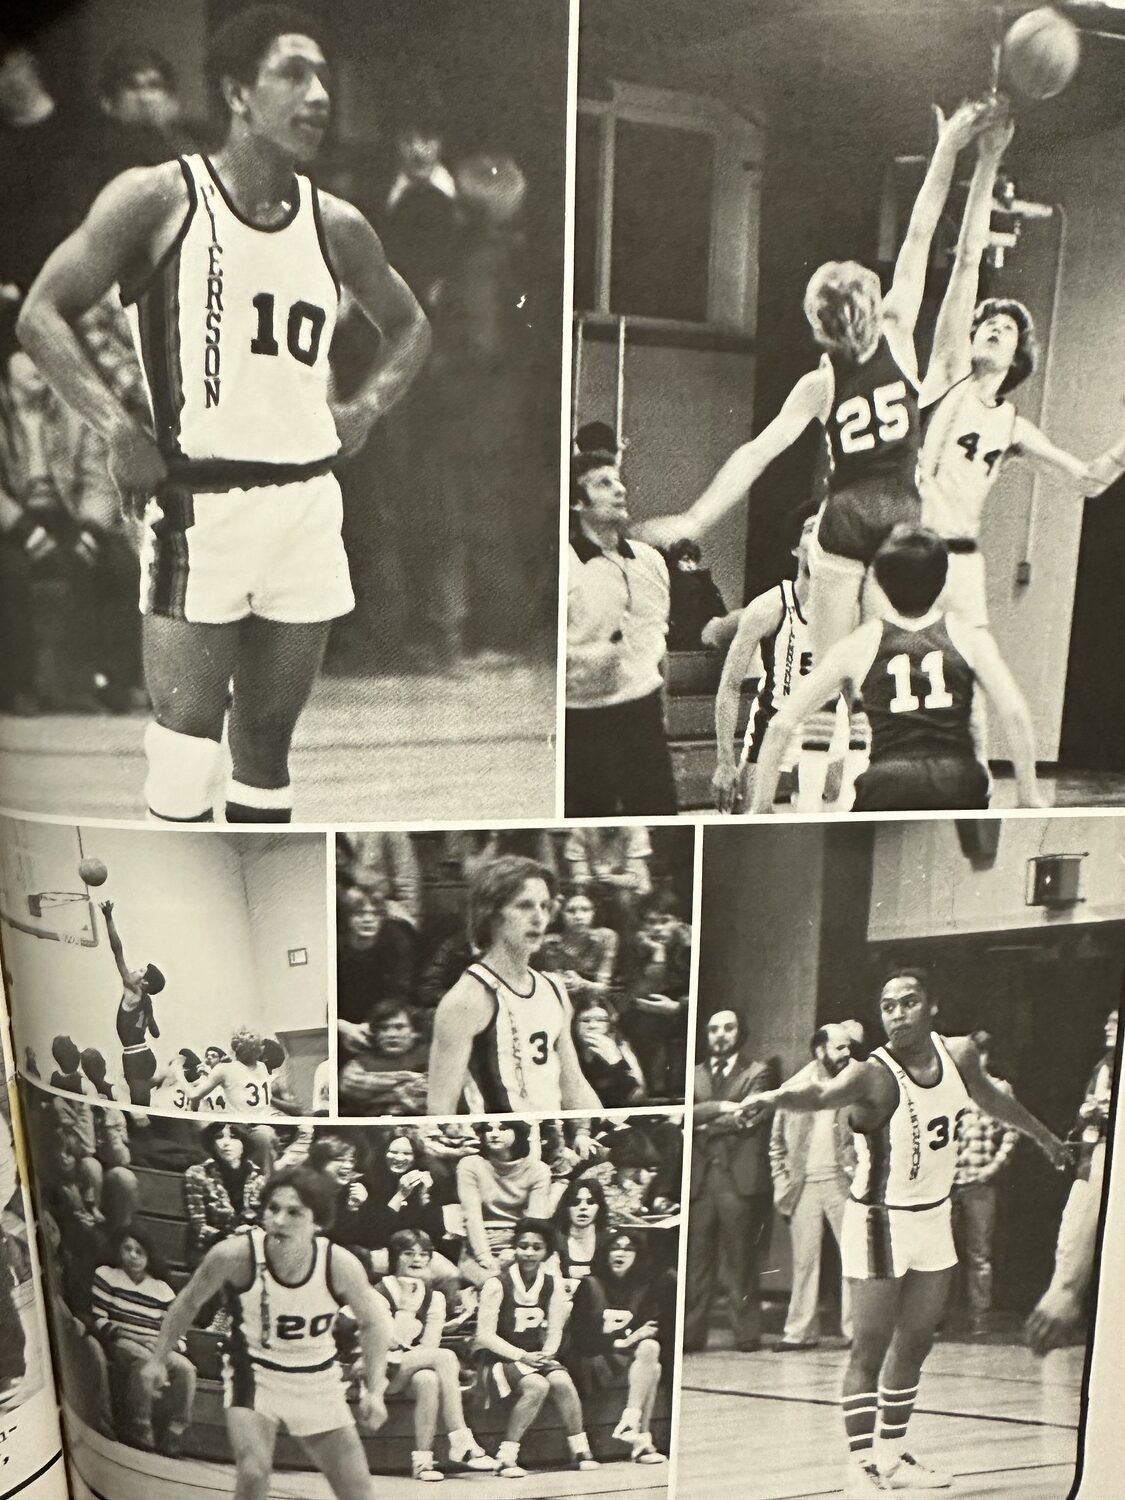 The 1978 team in action. PIERSON YEARBOOK PHOTOS